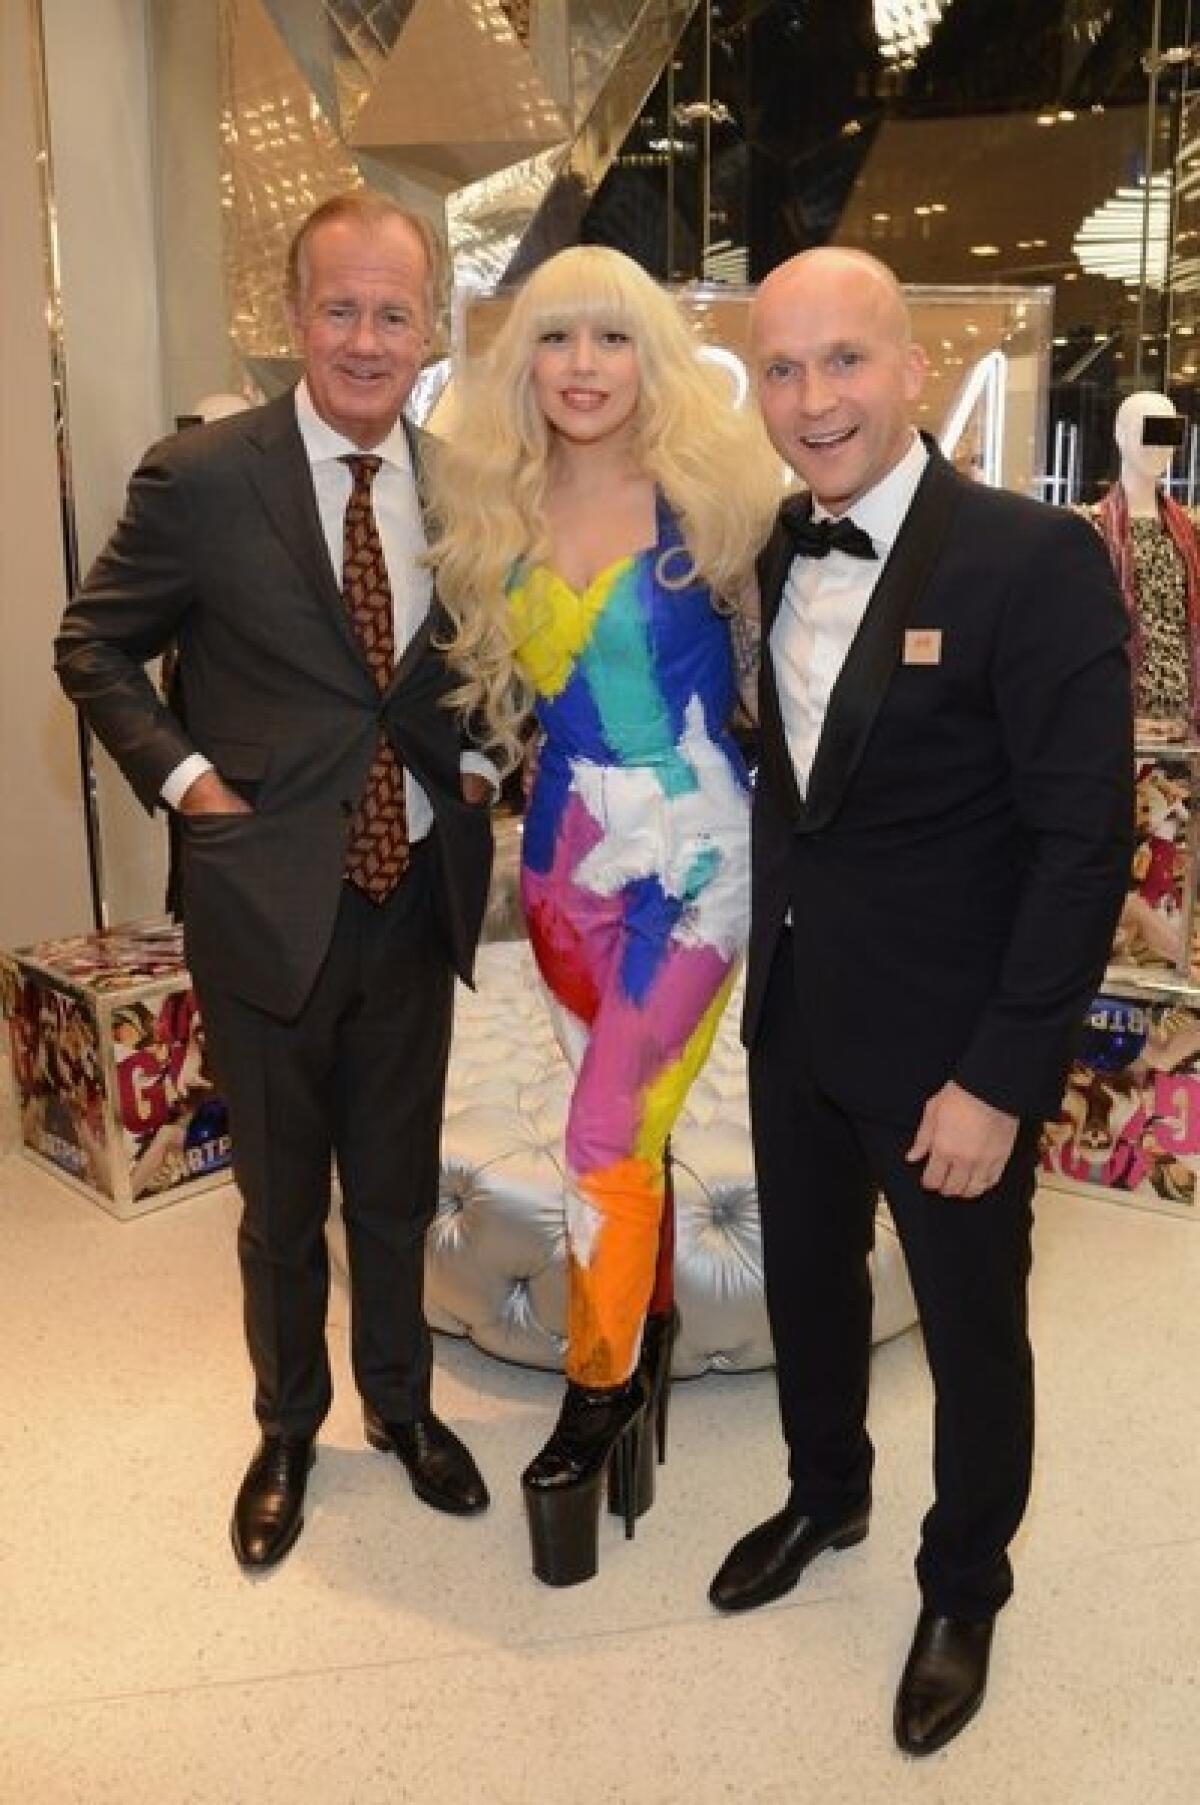 Lady Gaga joined H&M executives Stefan Persson, left, and Daniel Kulle for the midnight opening of a new H&M store in Times Square.